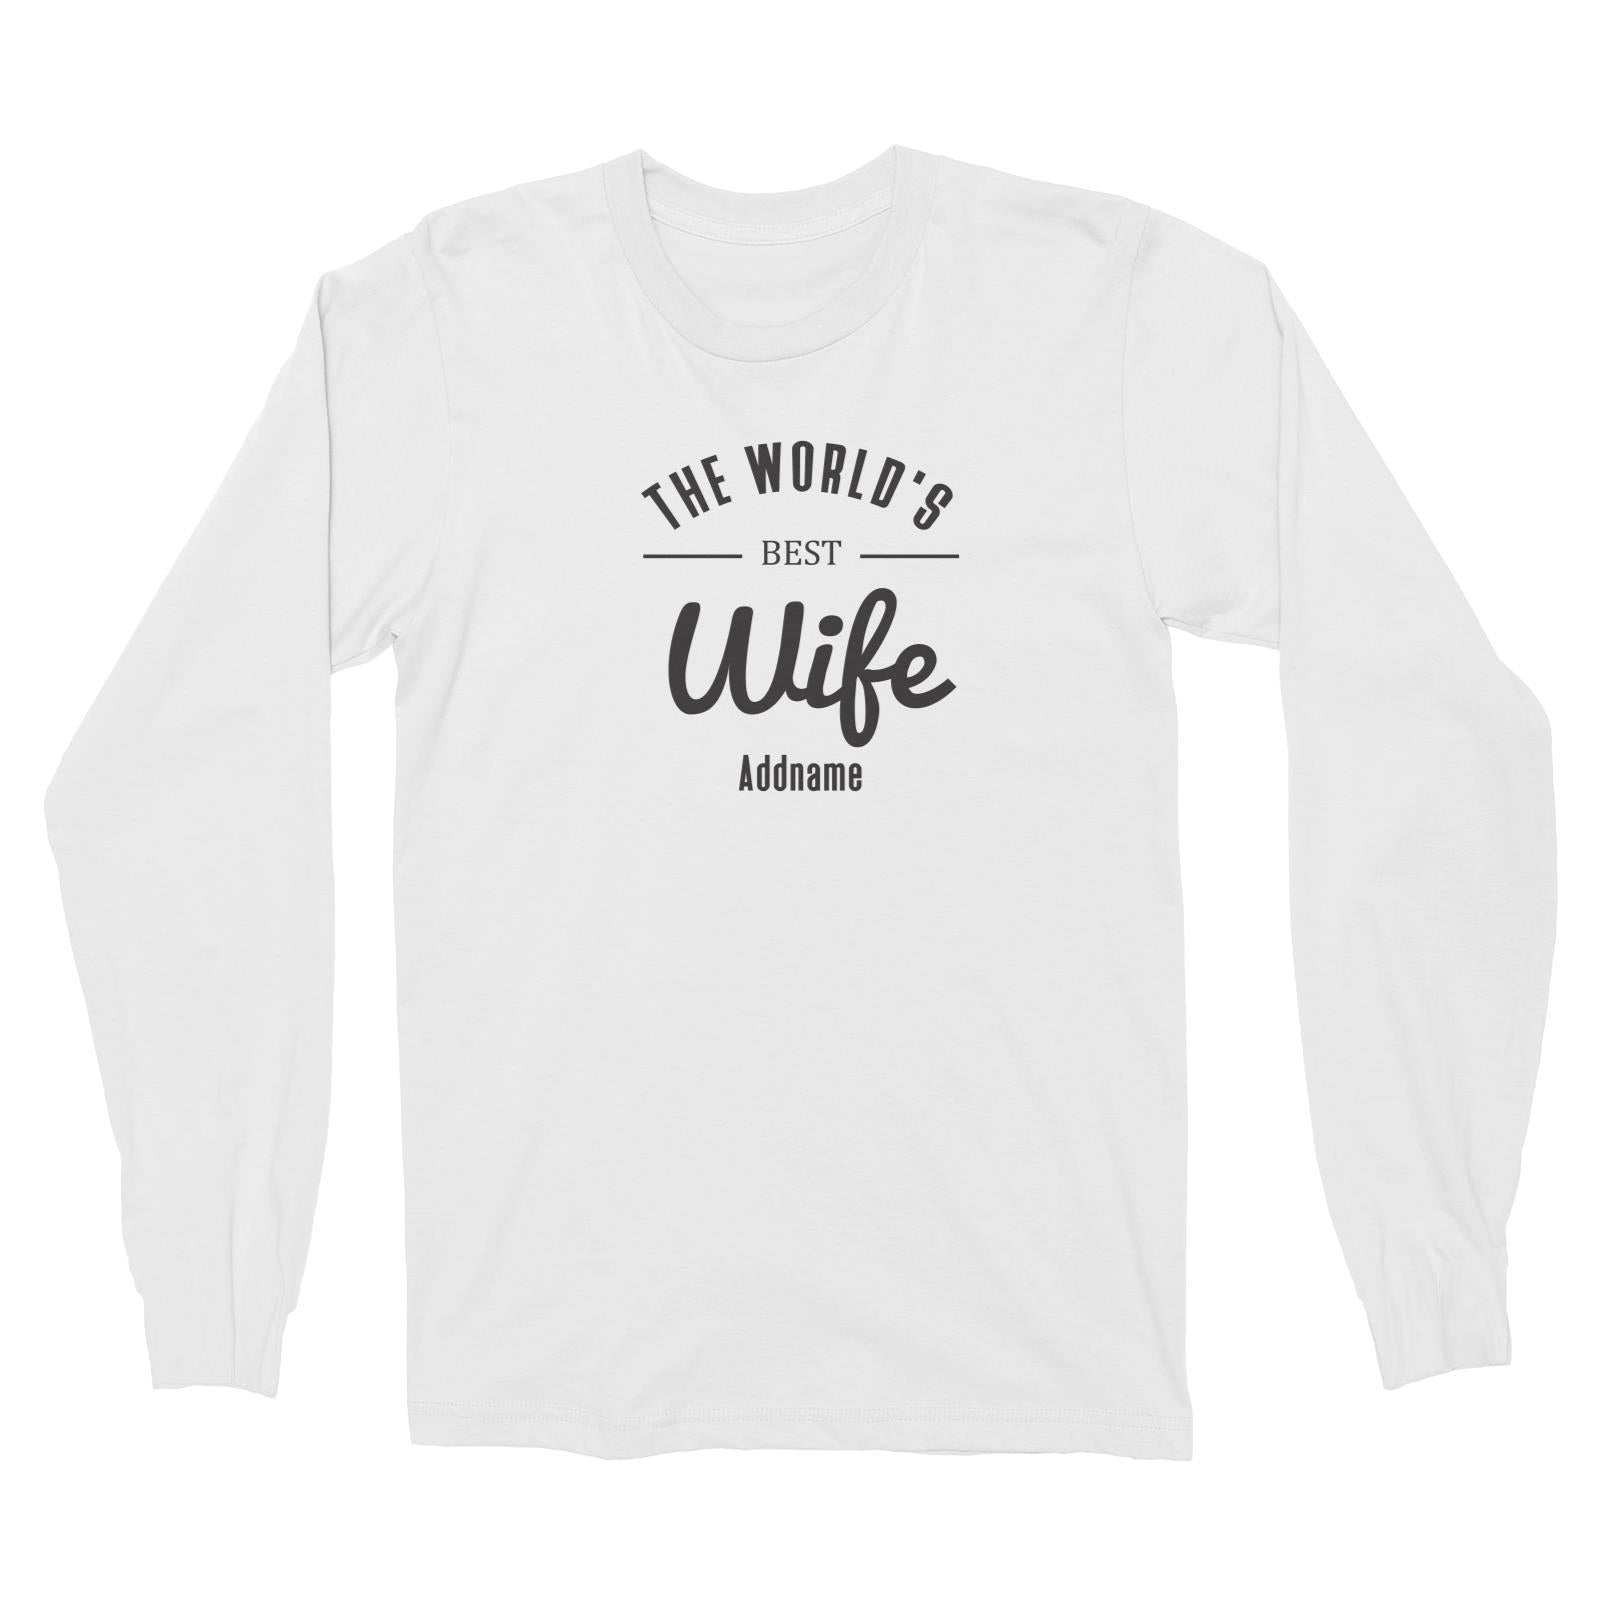 Husband and Wife The World's Best Wife Addname Long Sleeve Unisex T-Shirt